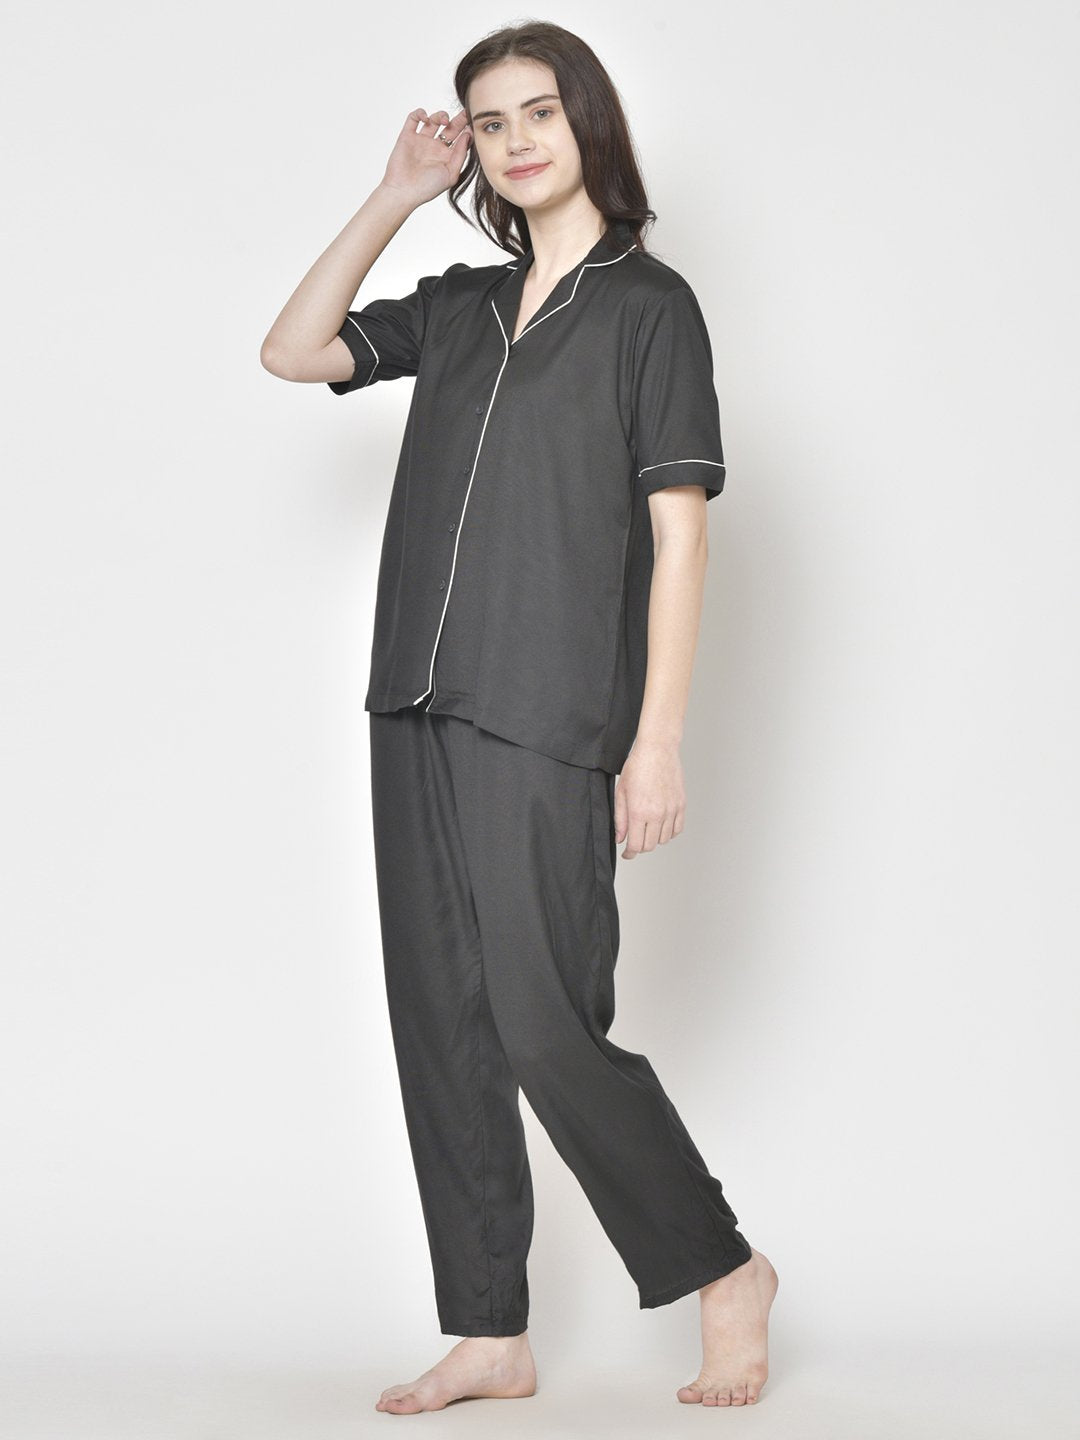 Cation Solid Black Night Suit